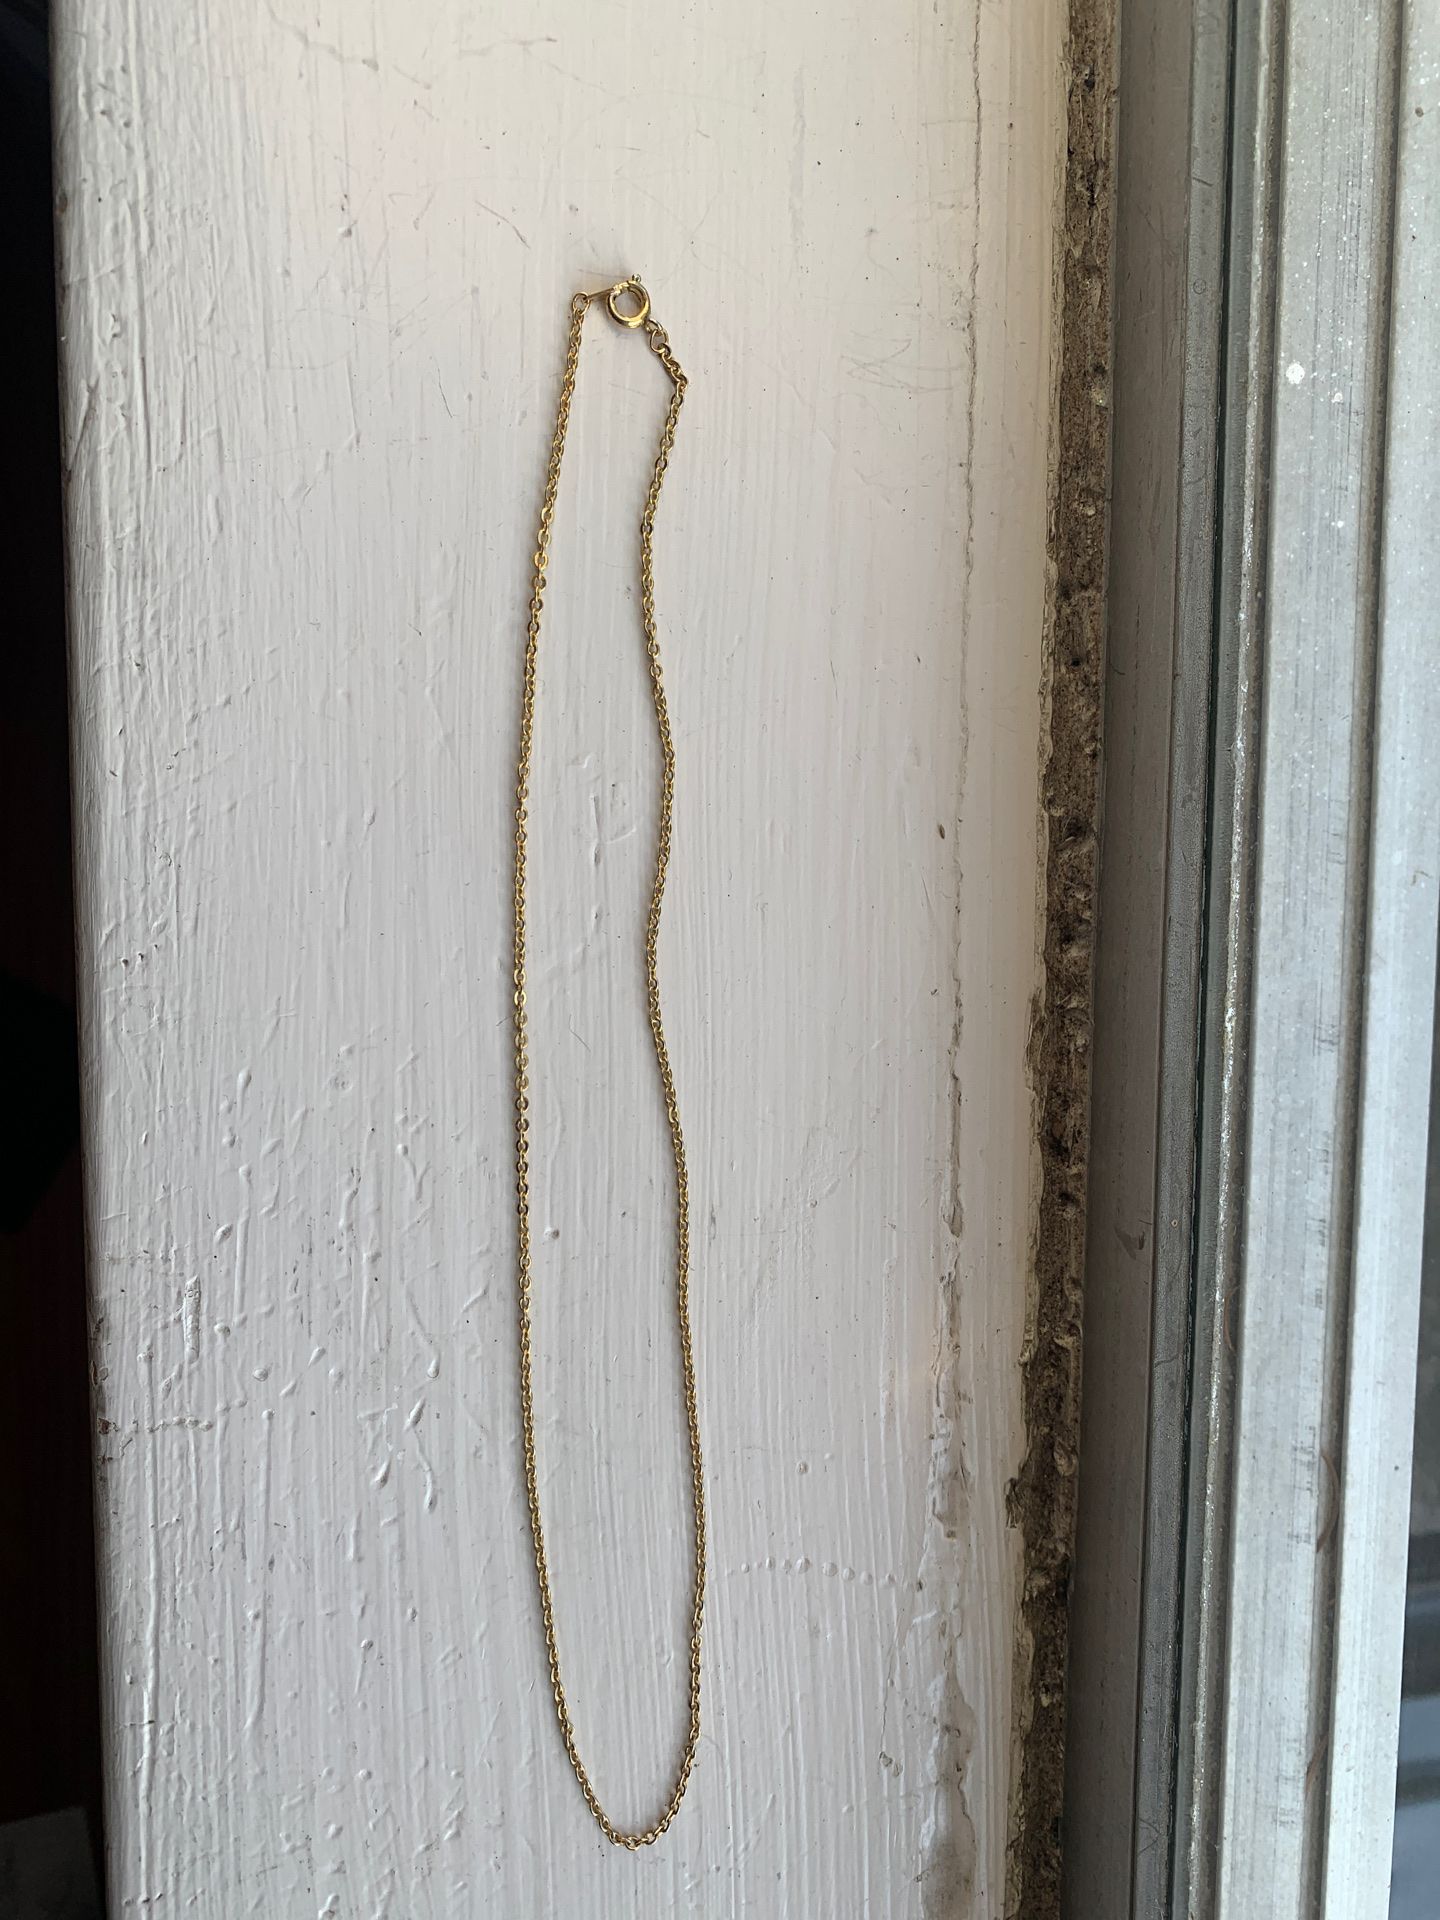 Gold filled necklace